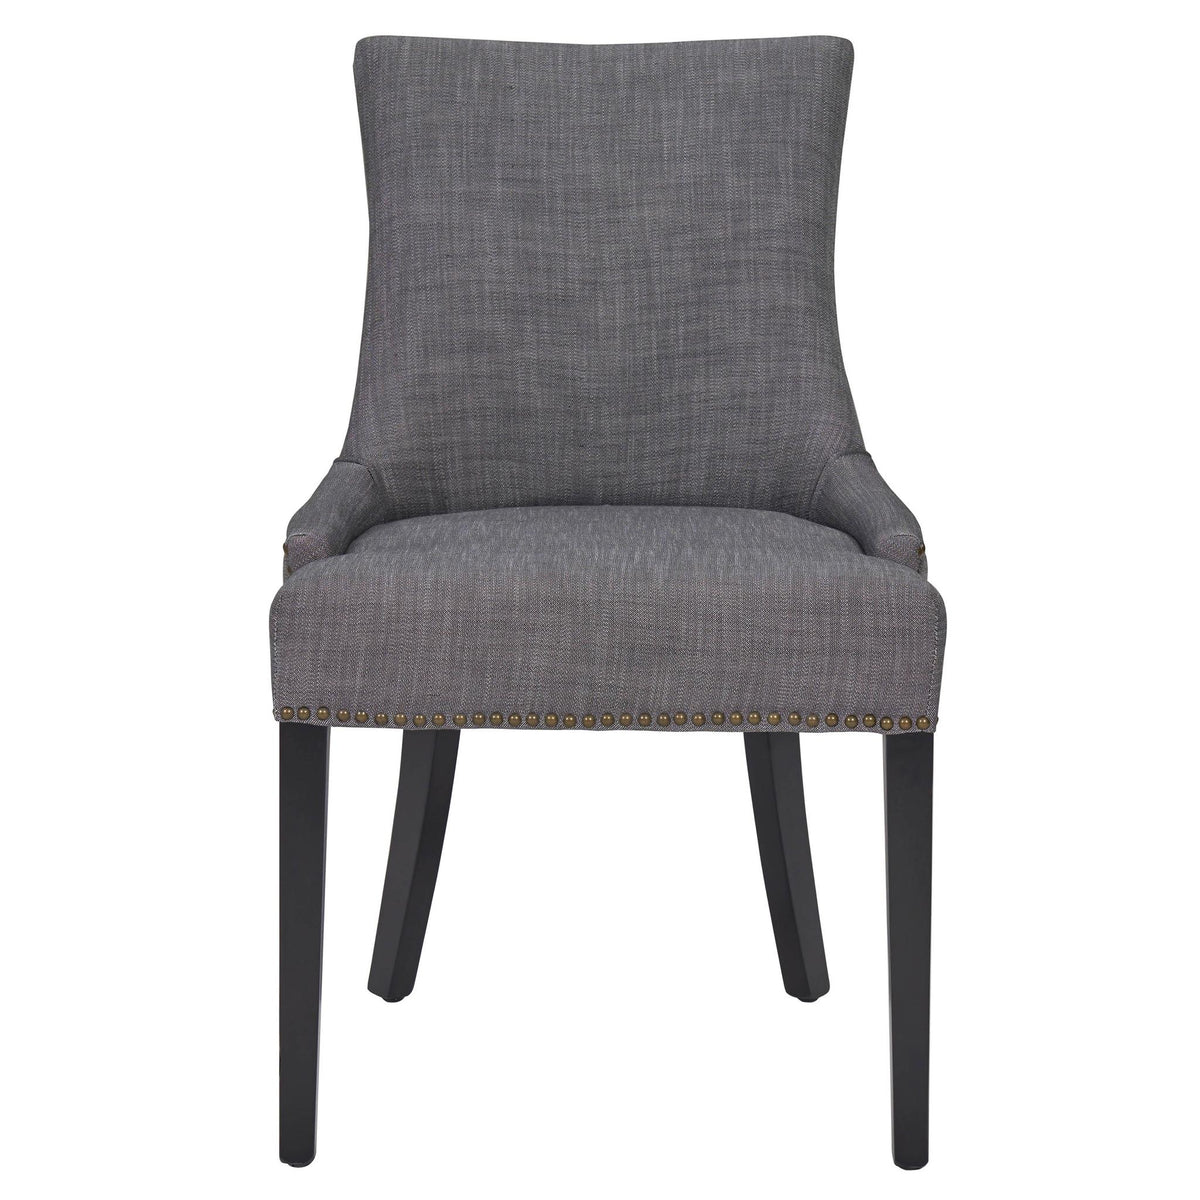 Charlotte KD Fabric Dining Chair (Set of 2) by New Pacific Direct - 108237(S5)